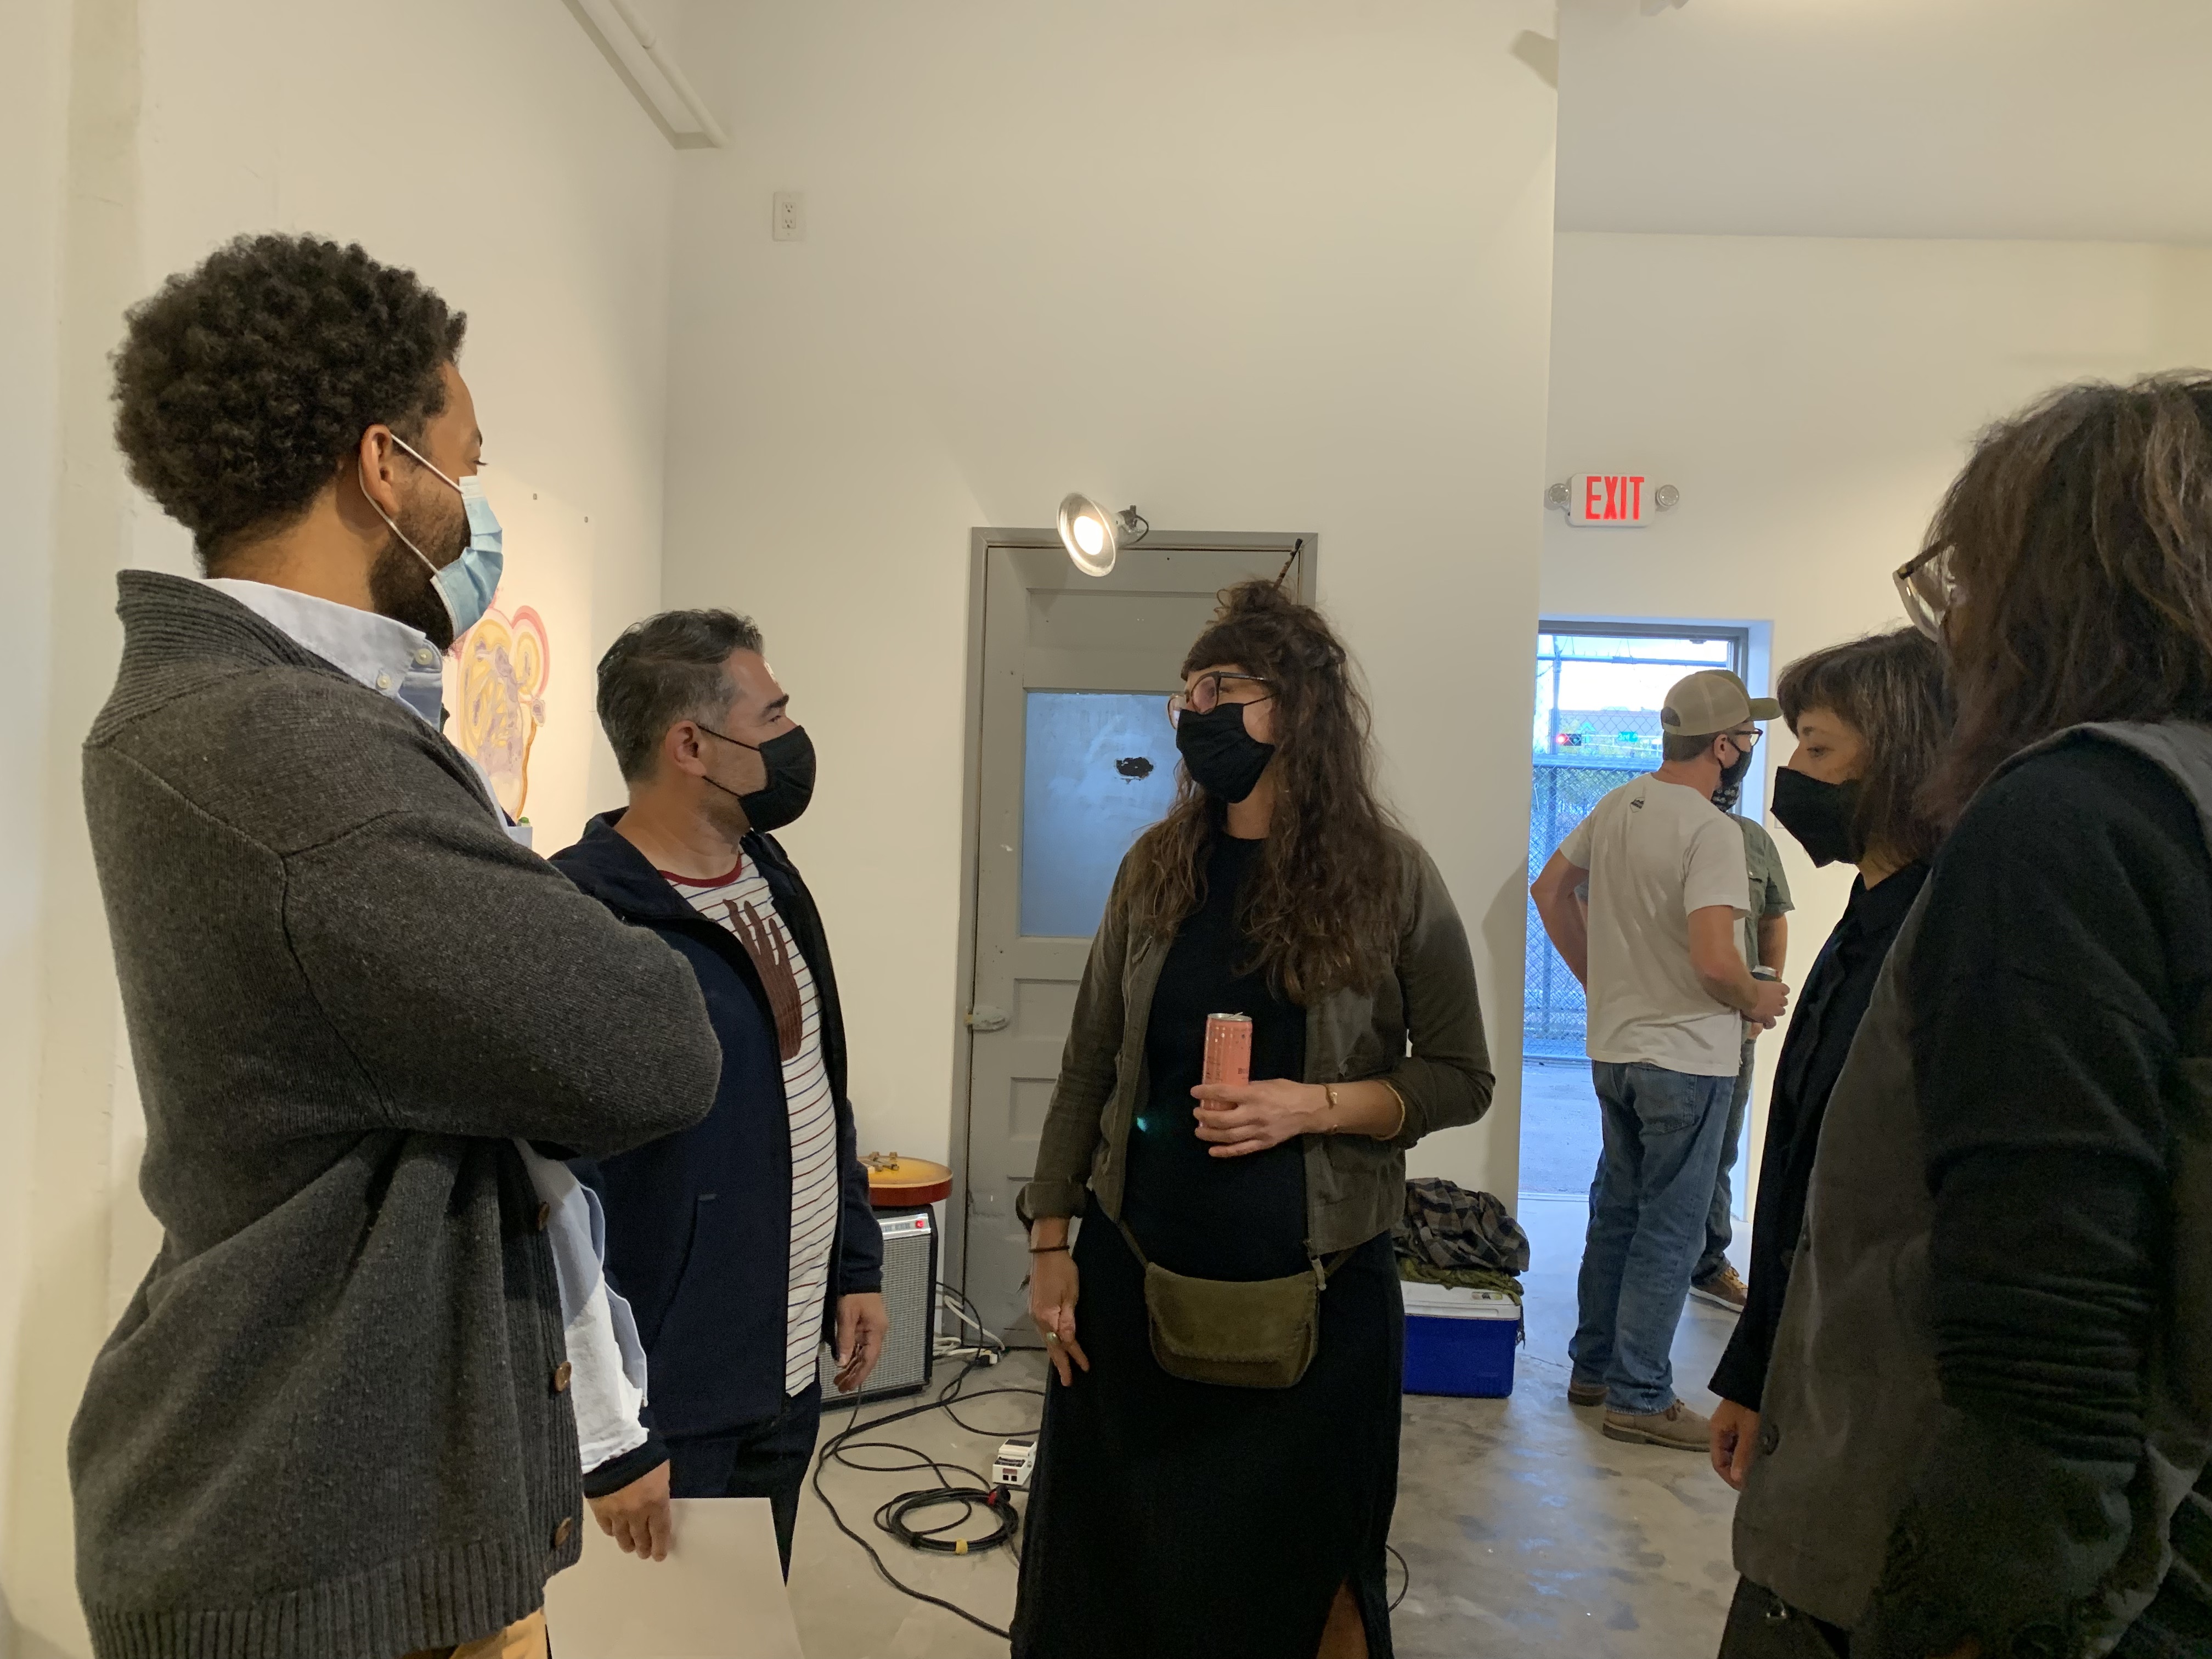 In October 2021, the residency artists visited the exhibition opening of “Adaptive Immunity” by the director of SFAI Toni Gentilli in Albuquerque, New Mexico.